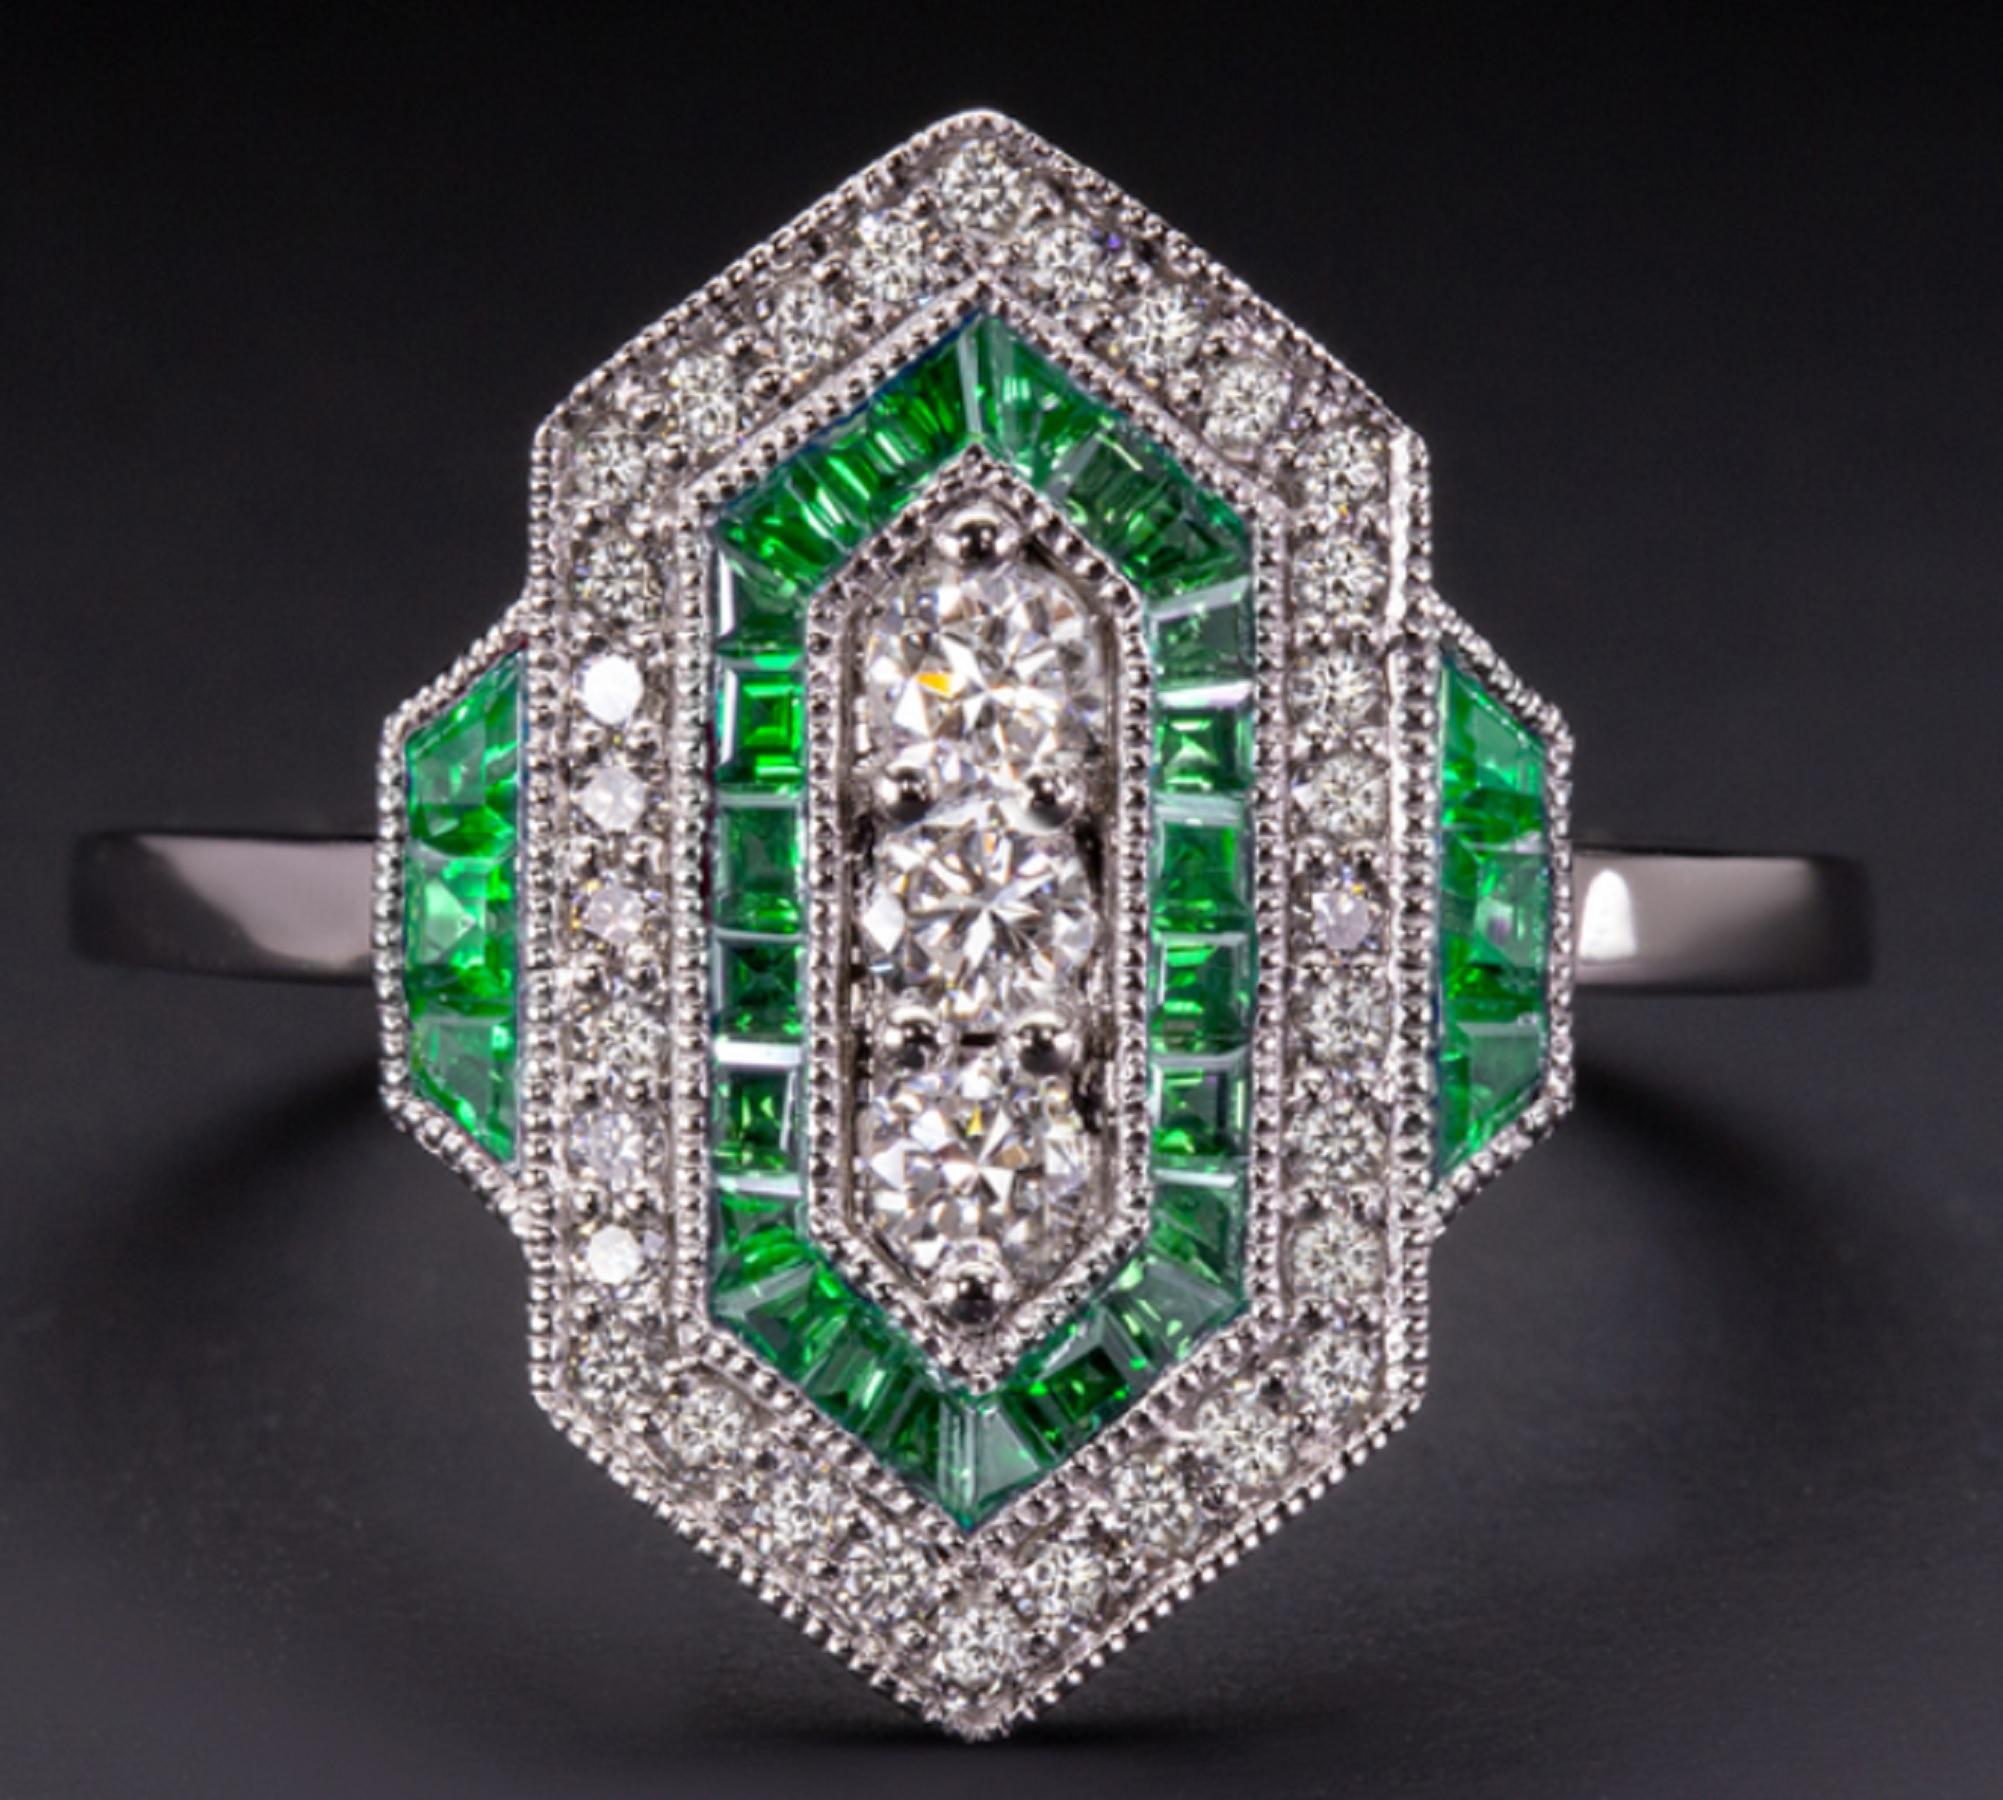 This beautiful diamond and emerald ring based on an iconic and elegant aesthetic from the Art Deco era! 

The chic geometric design shines with vibrant diamonds and is punctuated by spring green lines of meticulously cut emeralds.

The effect is